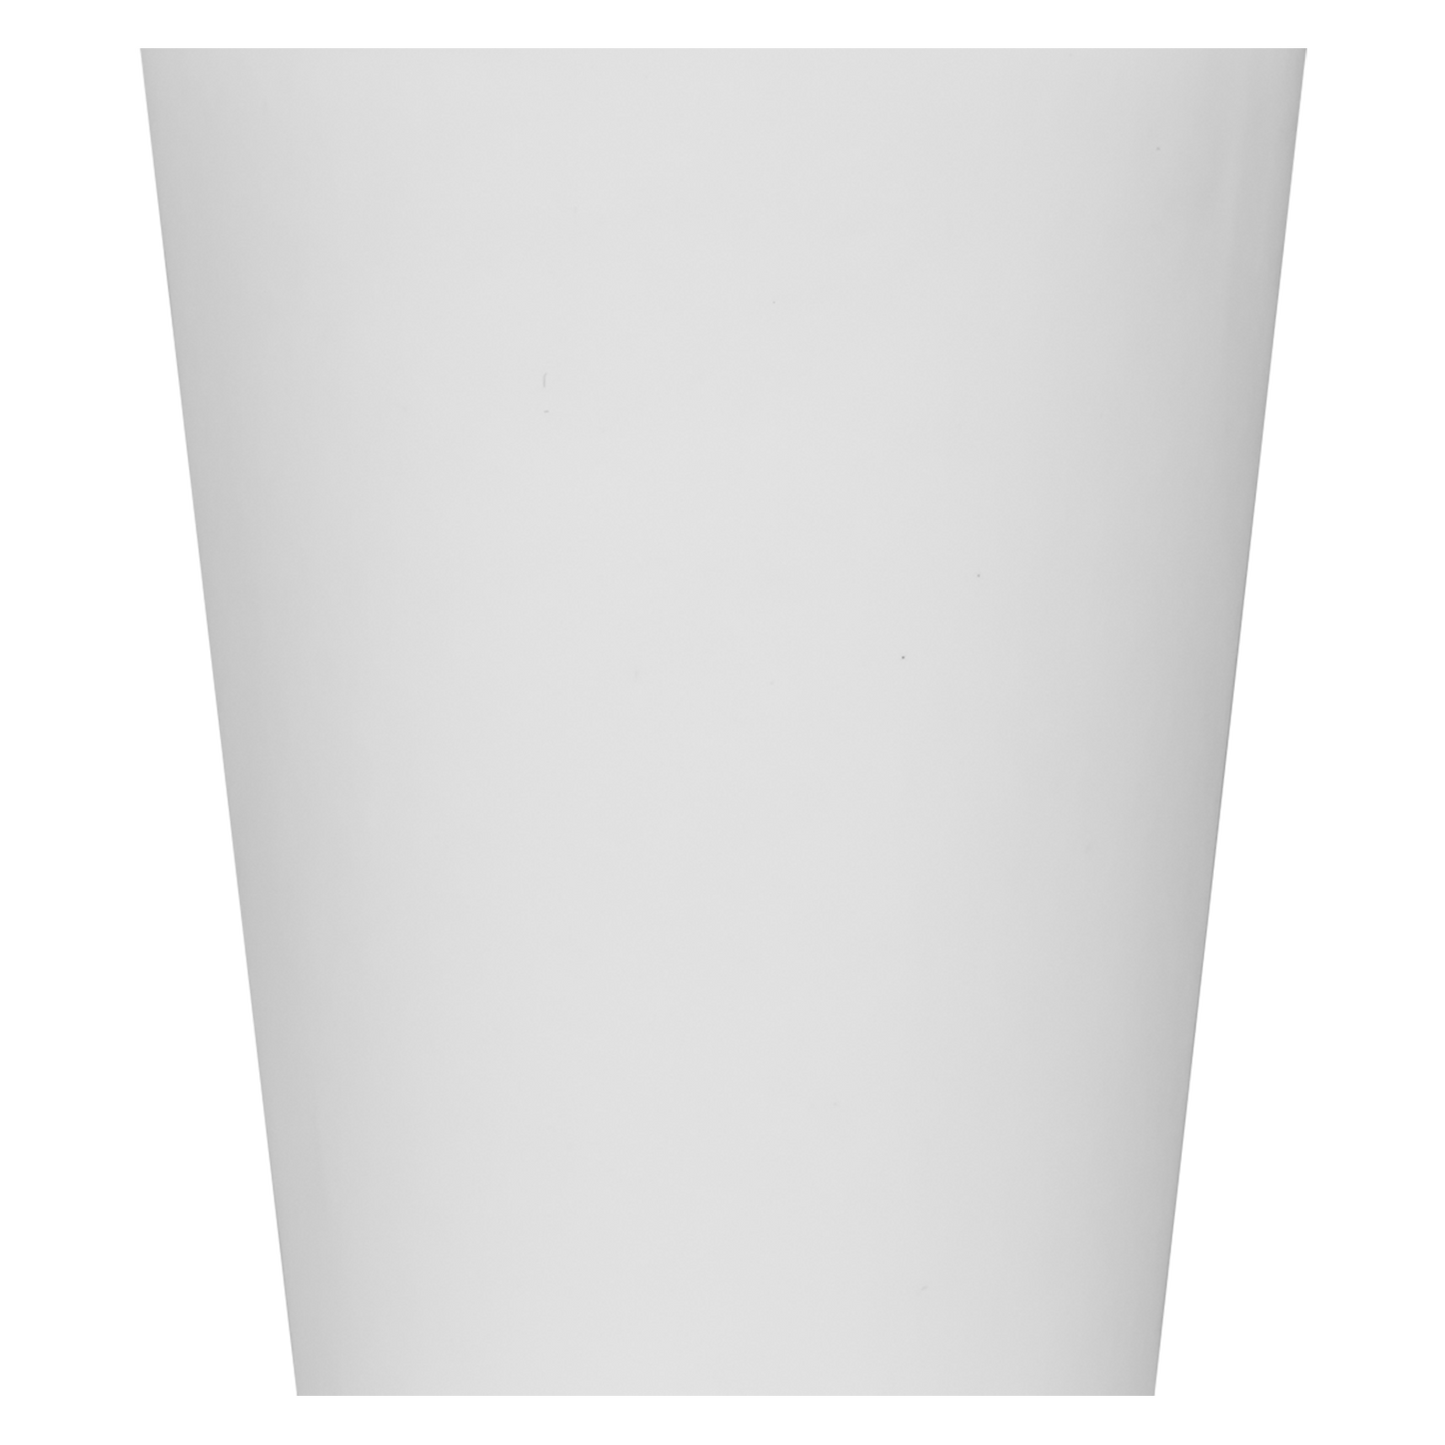 Karat 12oz Insulated Paper Hot Cups - White (90mm) - 500 ct